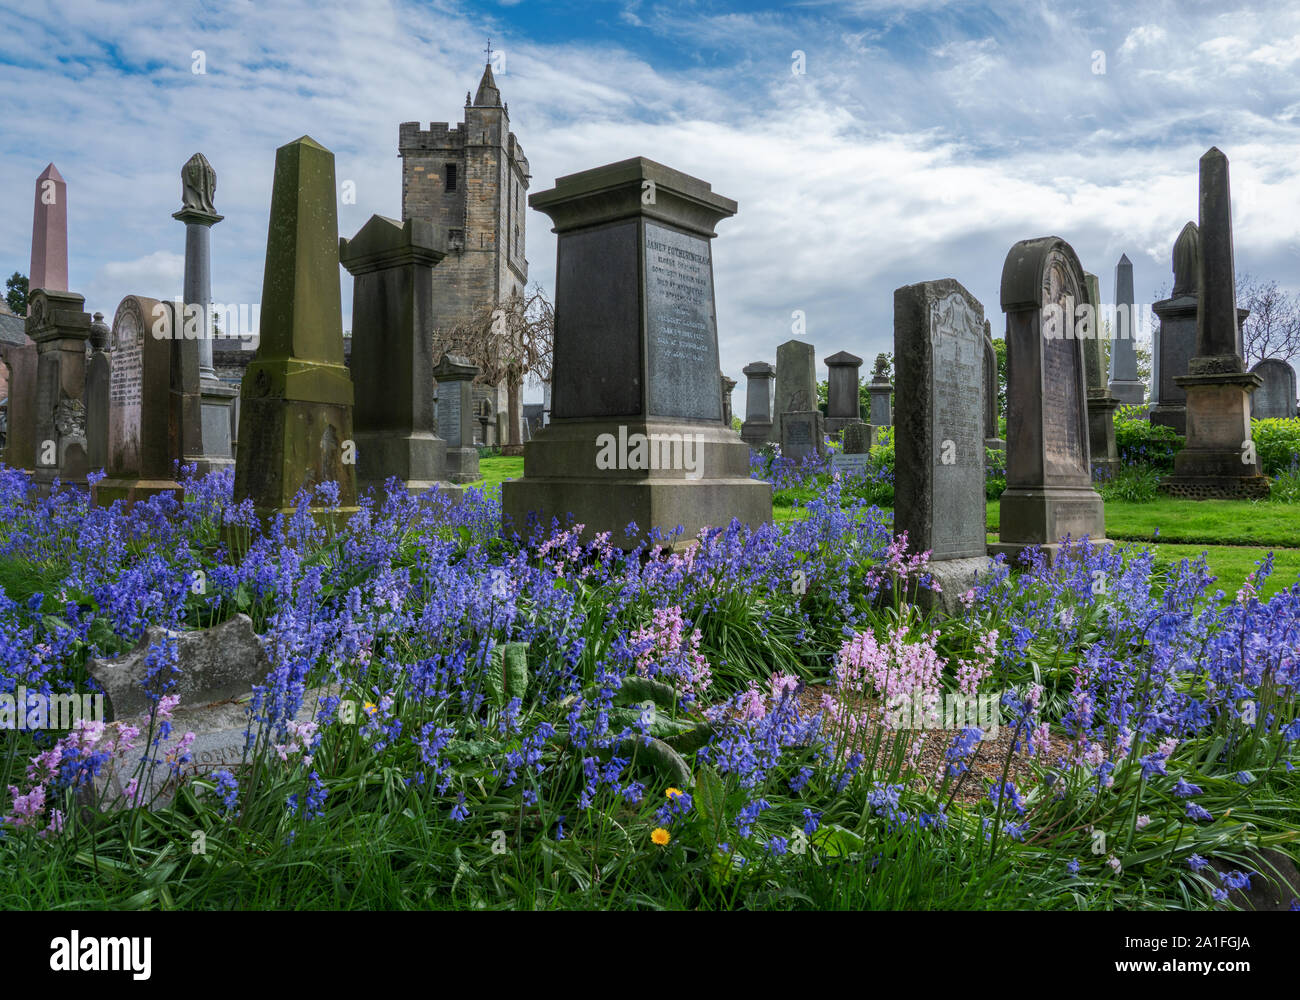 An old graveyard in Stirling - Scotland - during spring time Stock Photo